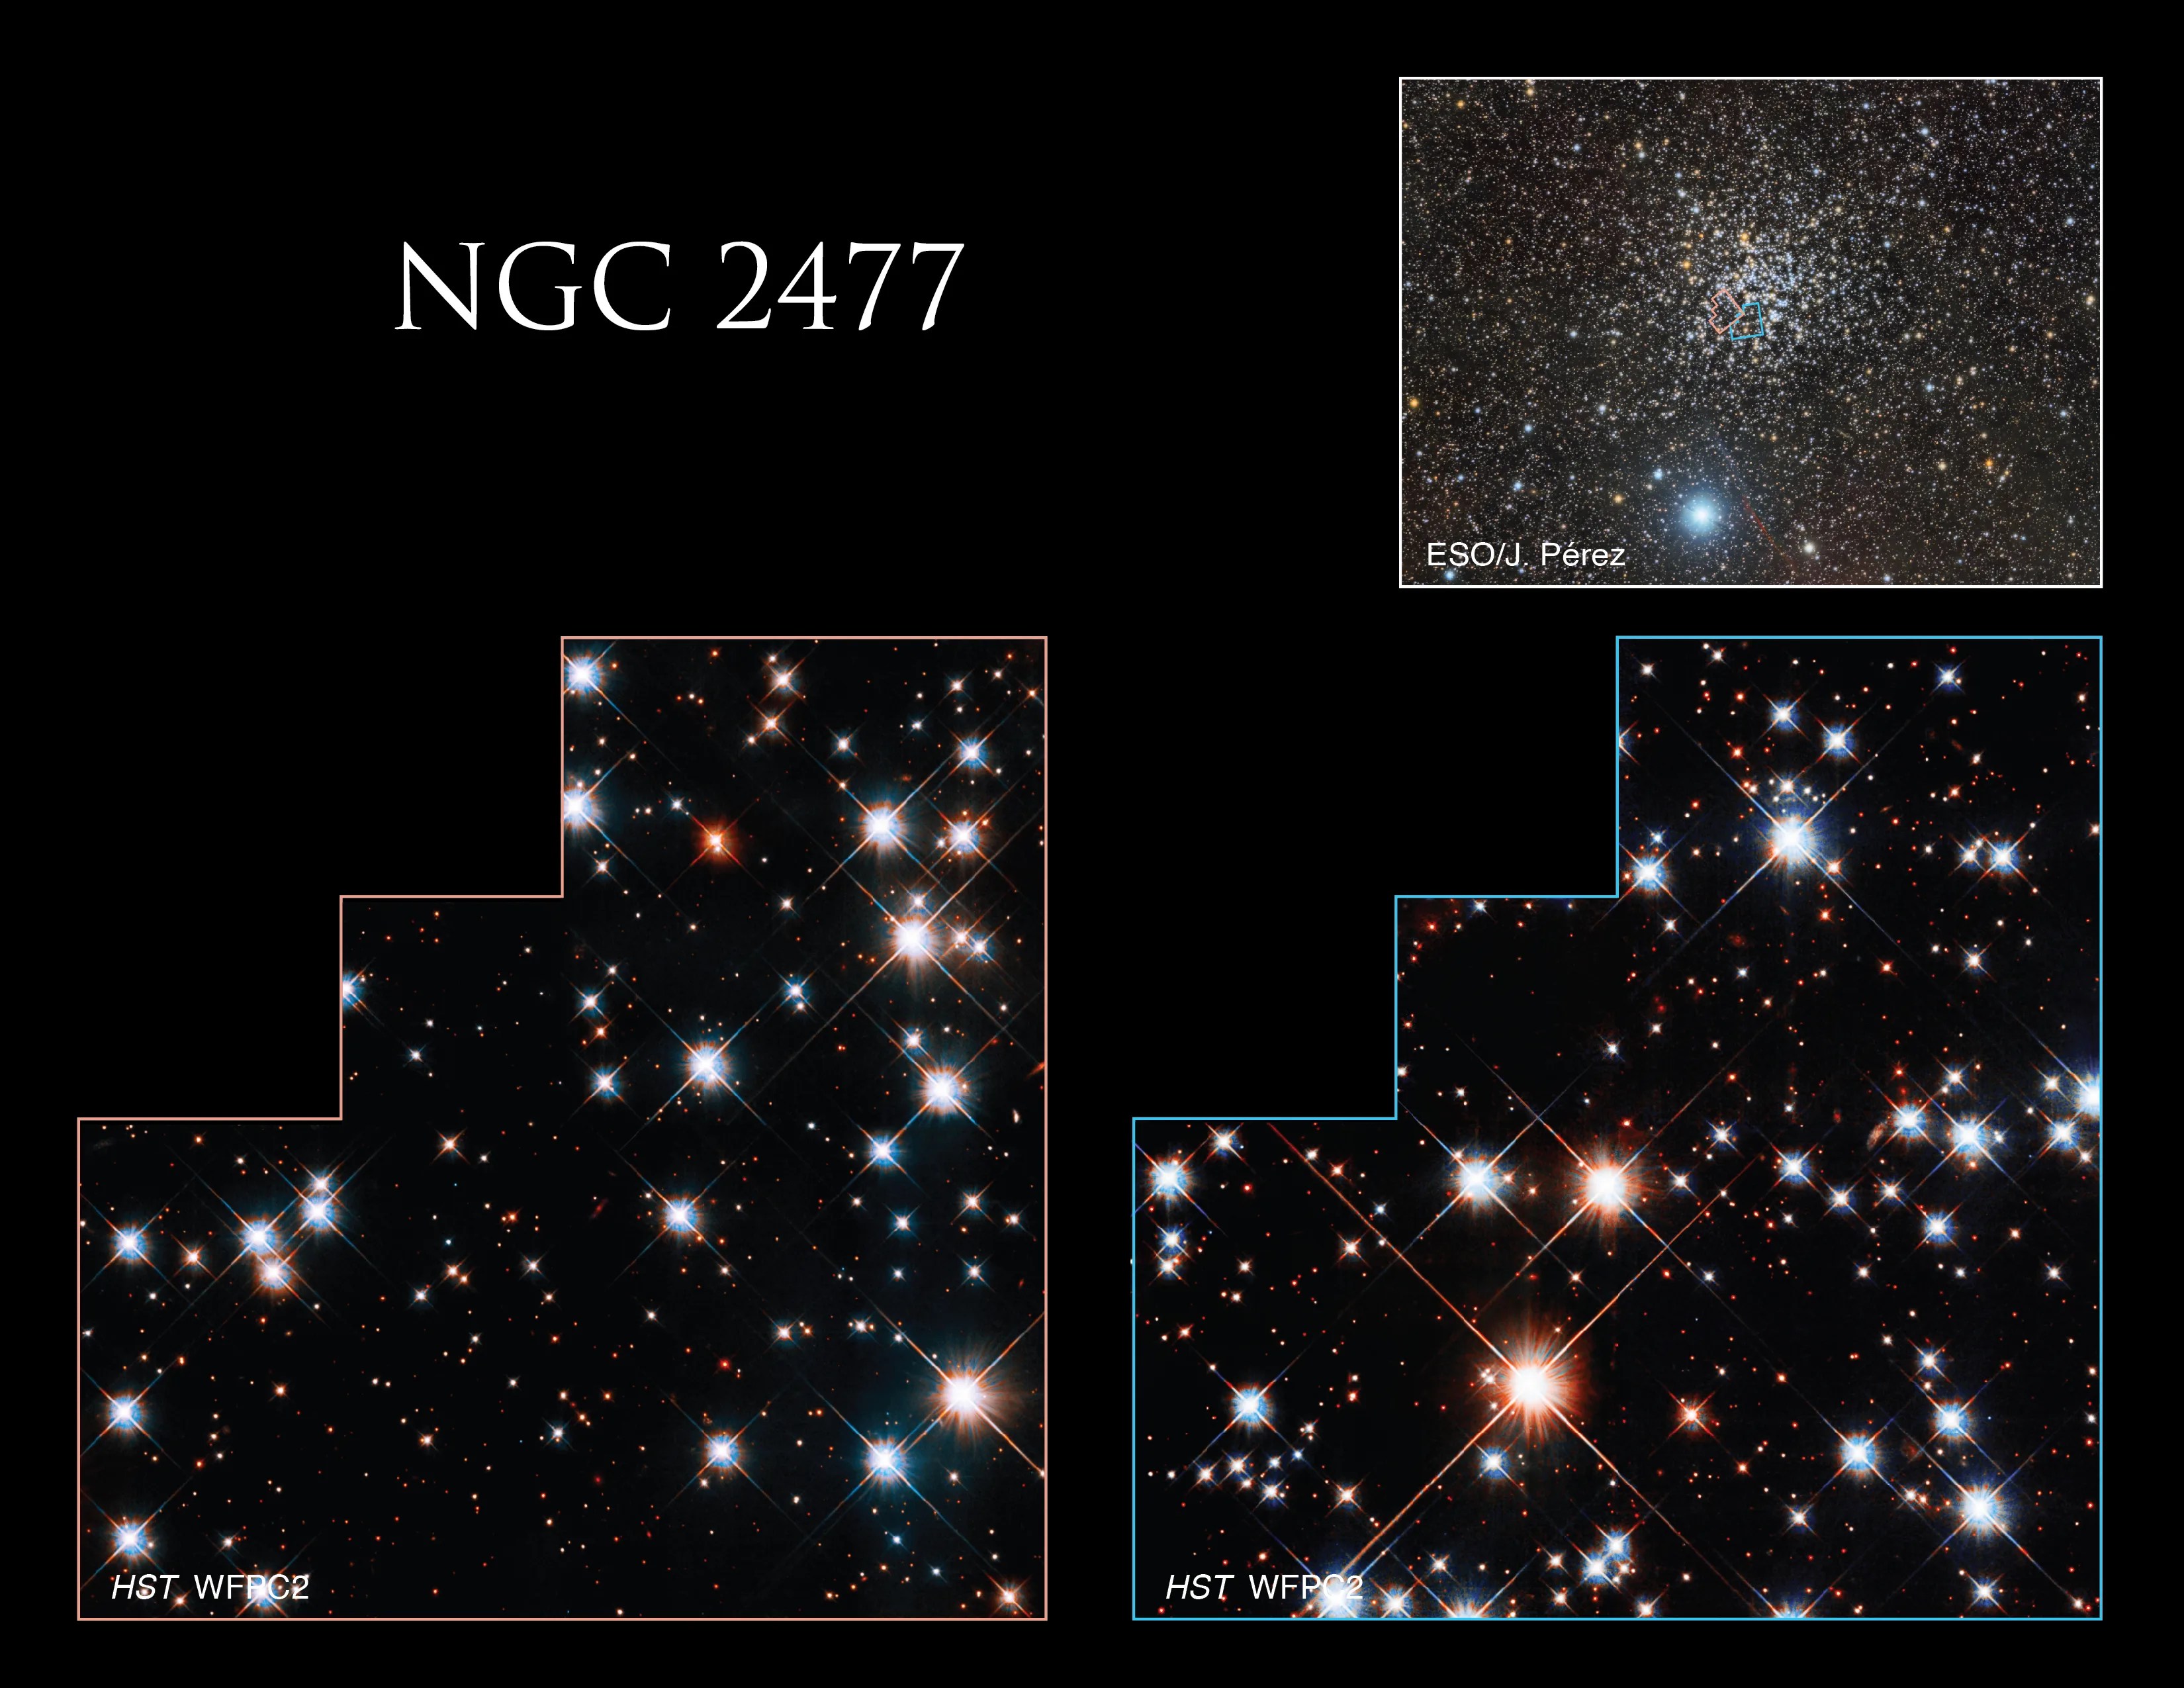 Two different Hubble images of C71 are shown side-by-side, with a ground-based observatory's more zoomed-out image in the upper right.